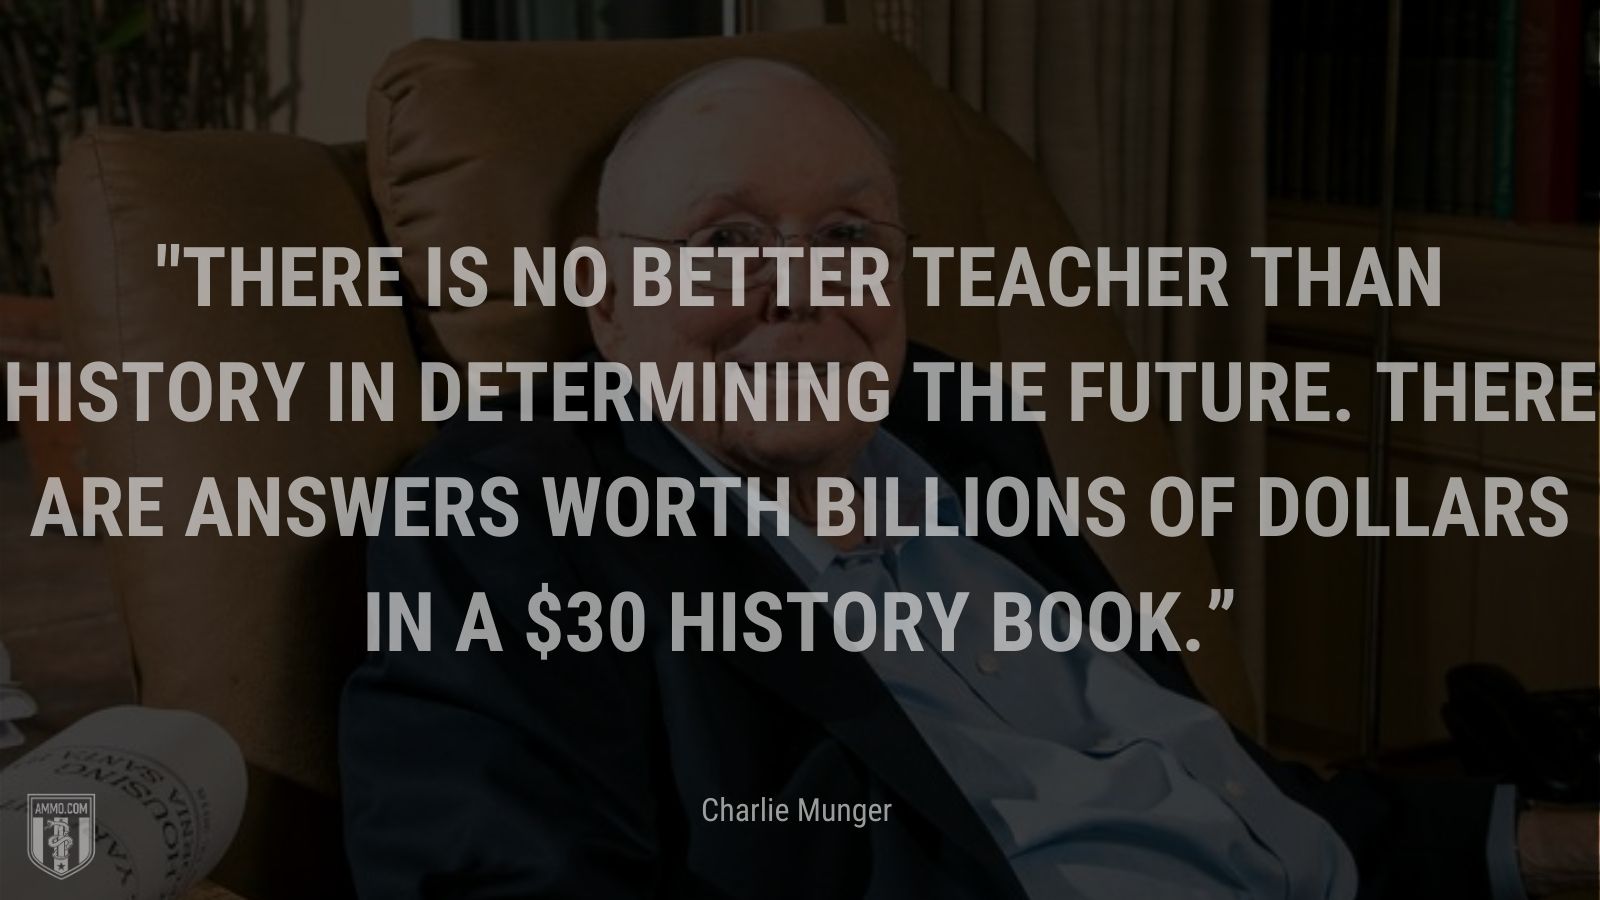 “There is no better teacher than history in determining the future. There are answers worth billions of dollars in a $30 history book.” - Charlie Munger